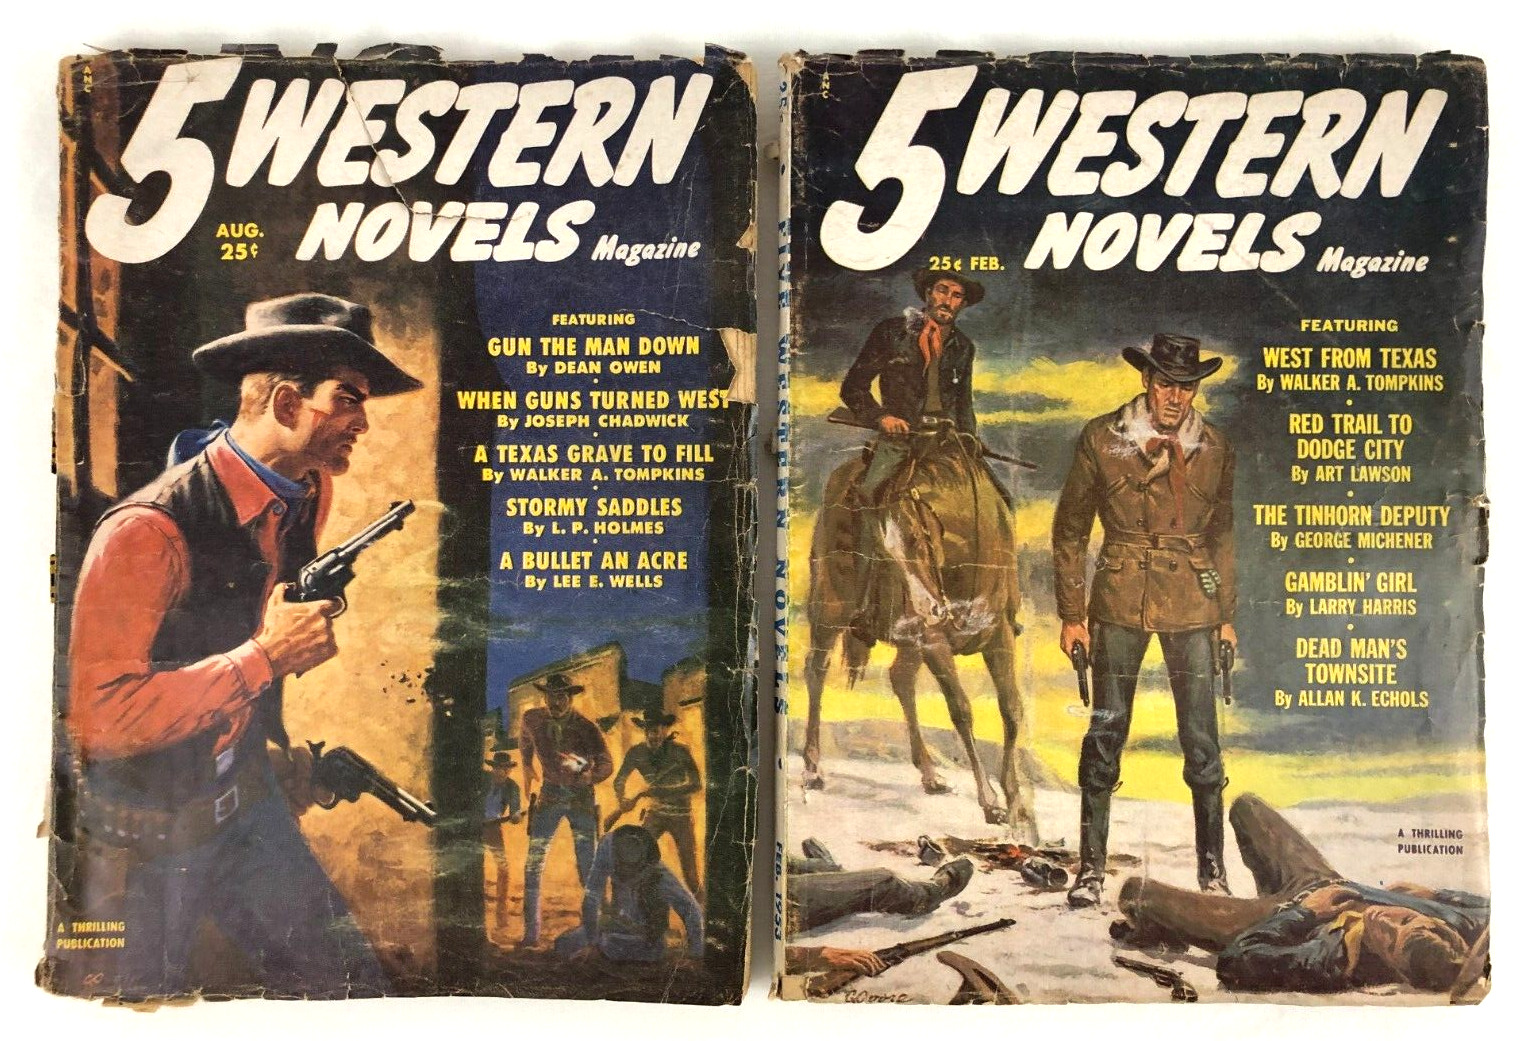 5 Western Novels Mag, Lot of 2, Aug 1952 & Feb 1953, Pulp Fiction, Acceptable